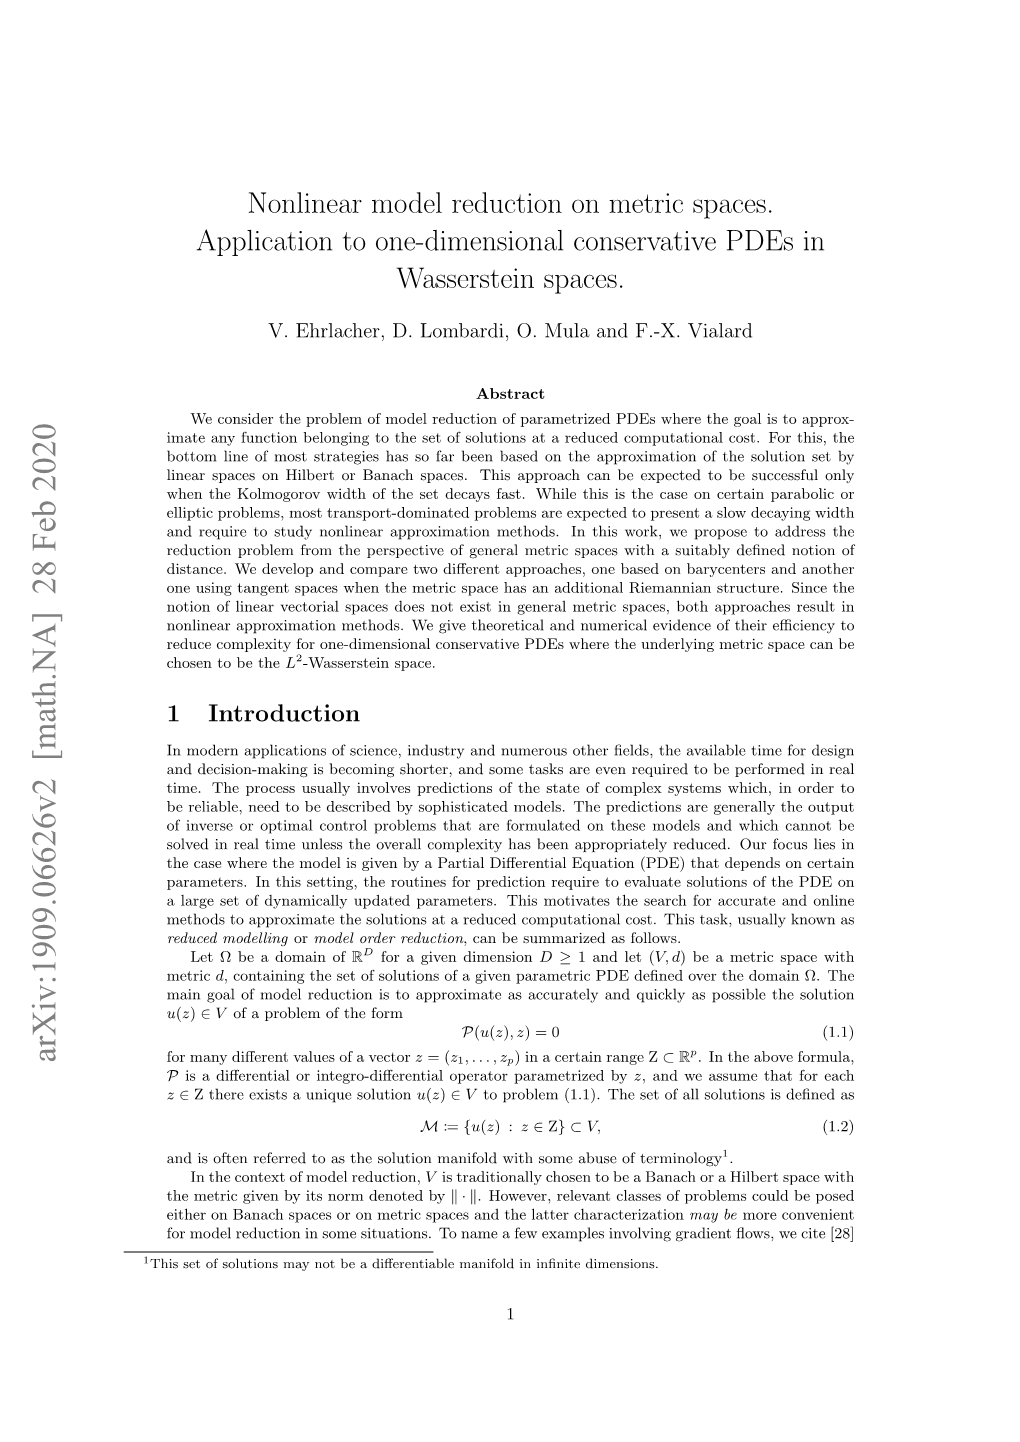 Nonlinear Model Reduction on Metric Spaces. Application to One-Dimensional Conservative Pdes in Wasserstein Spaces